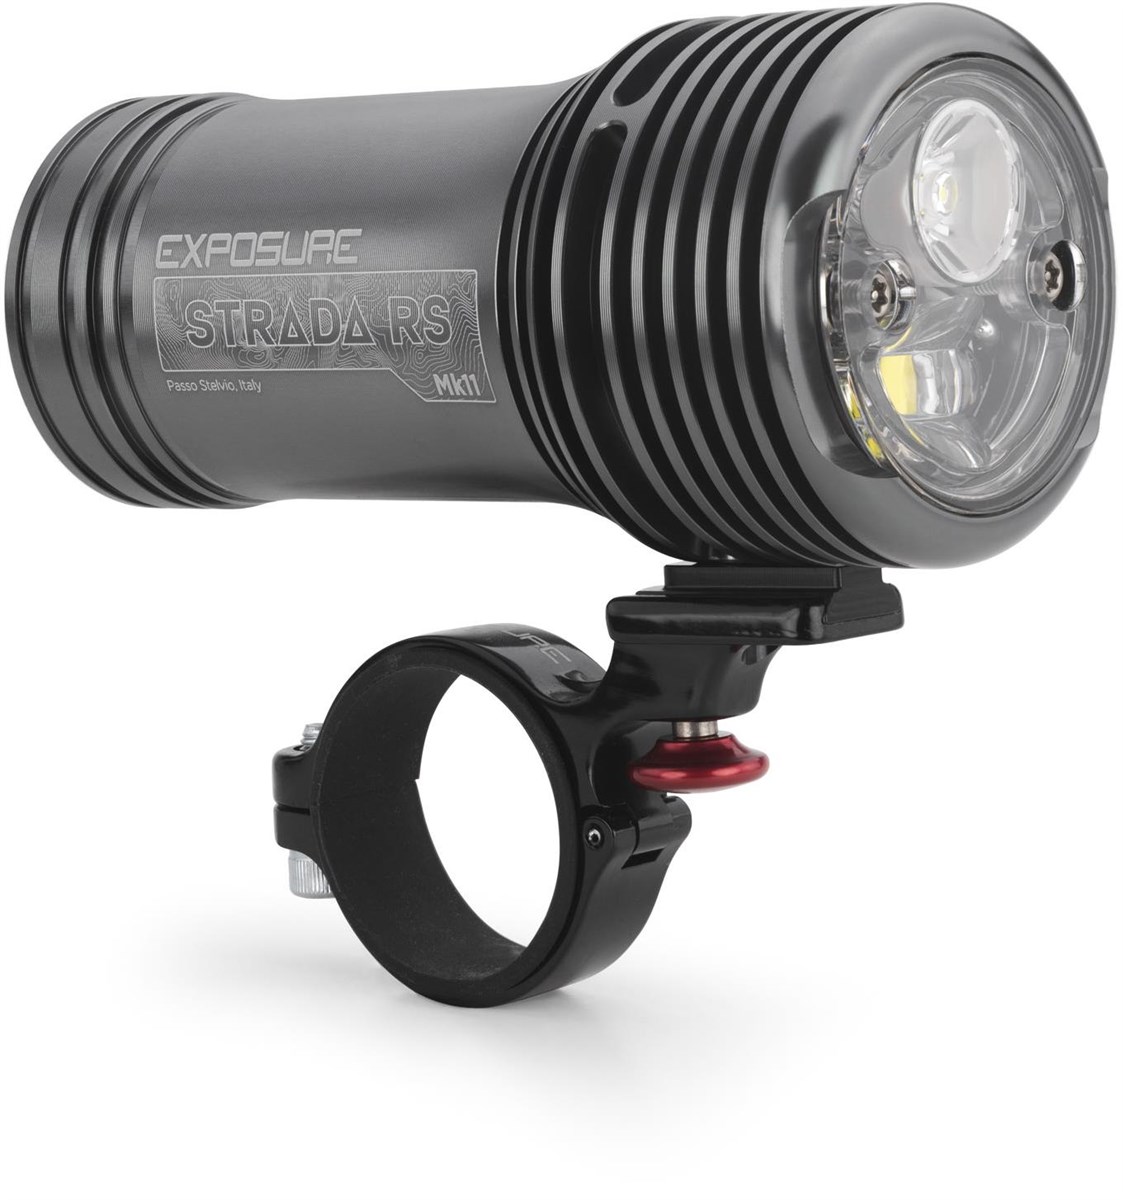 Exposure Strada Mk11 Road Sport Front Light with Remote Switch product image